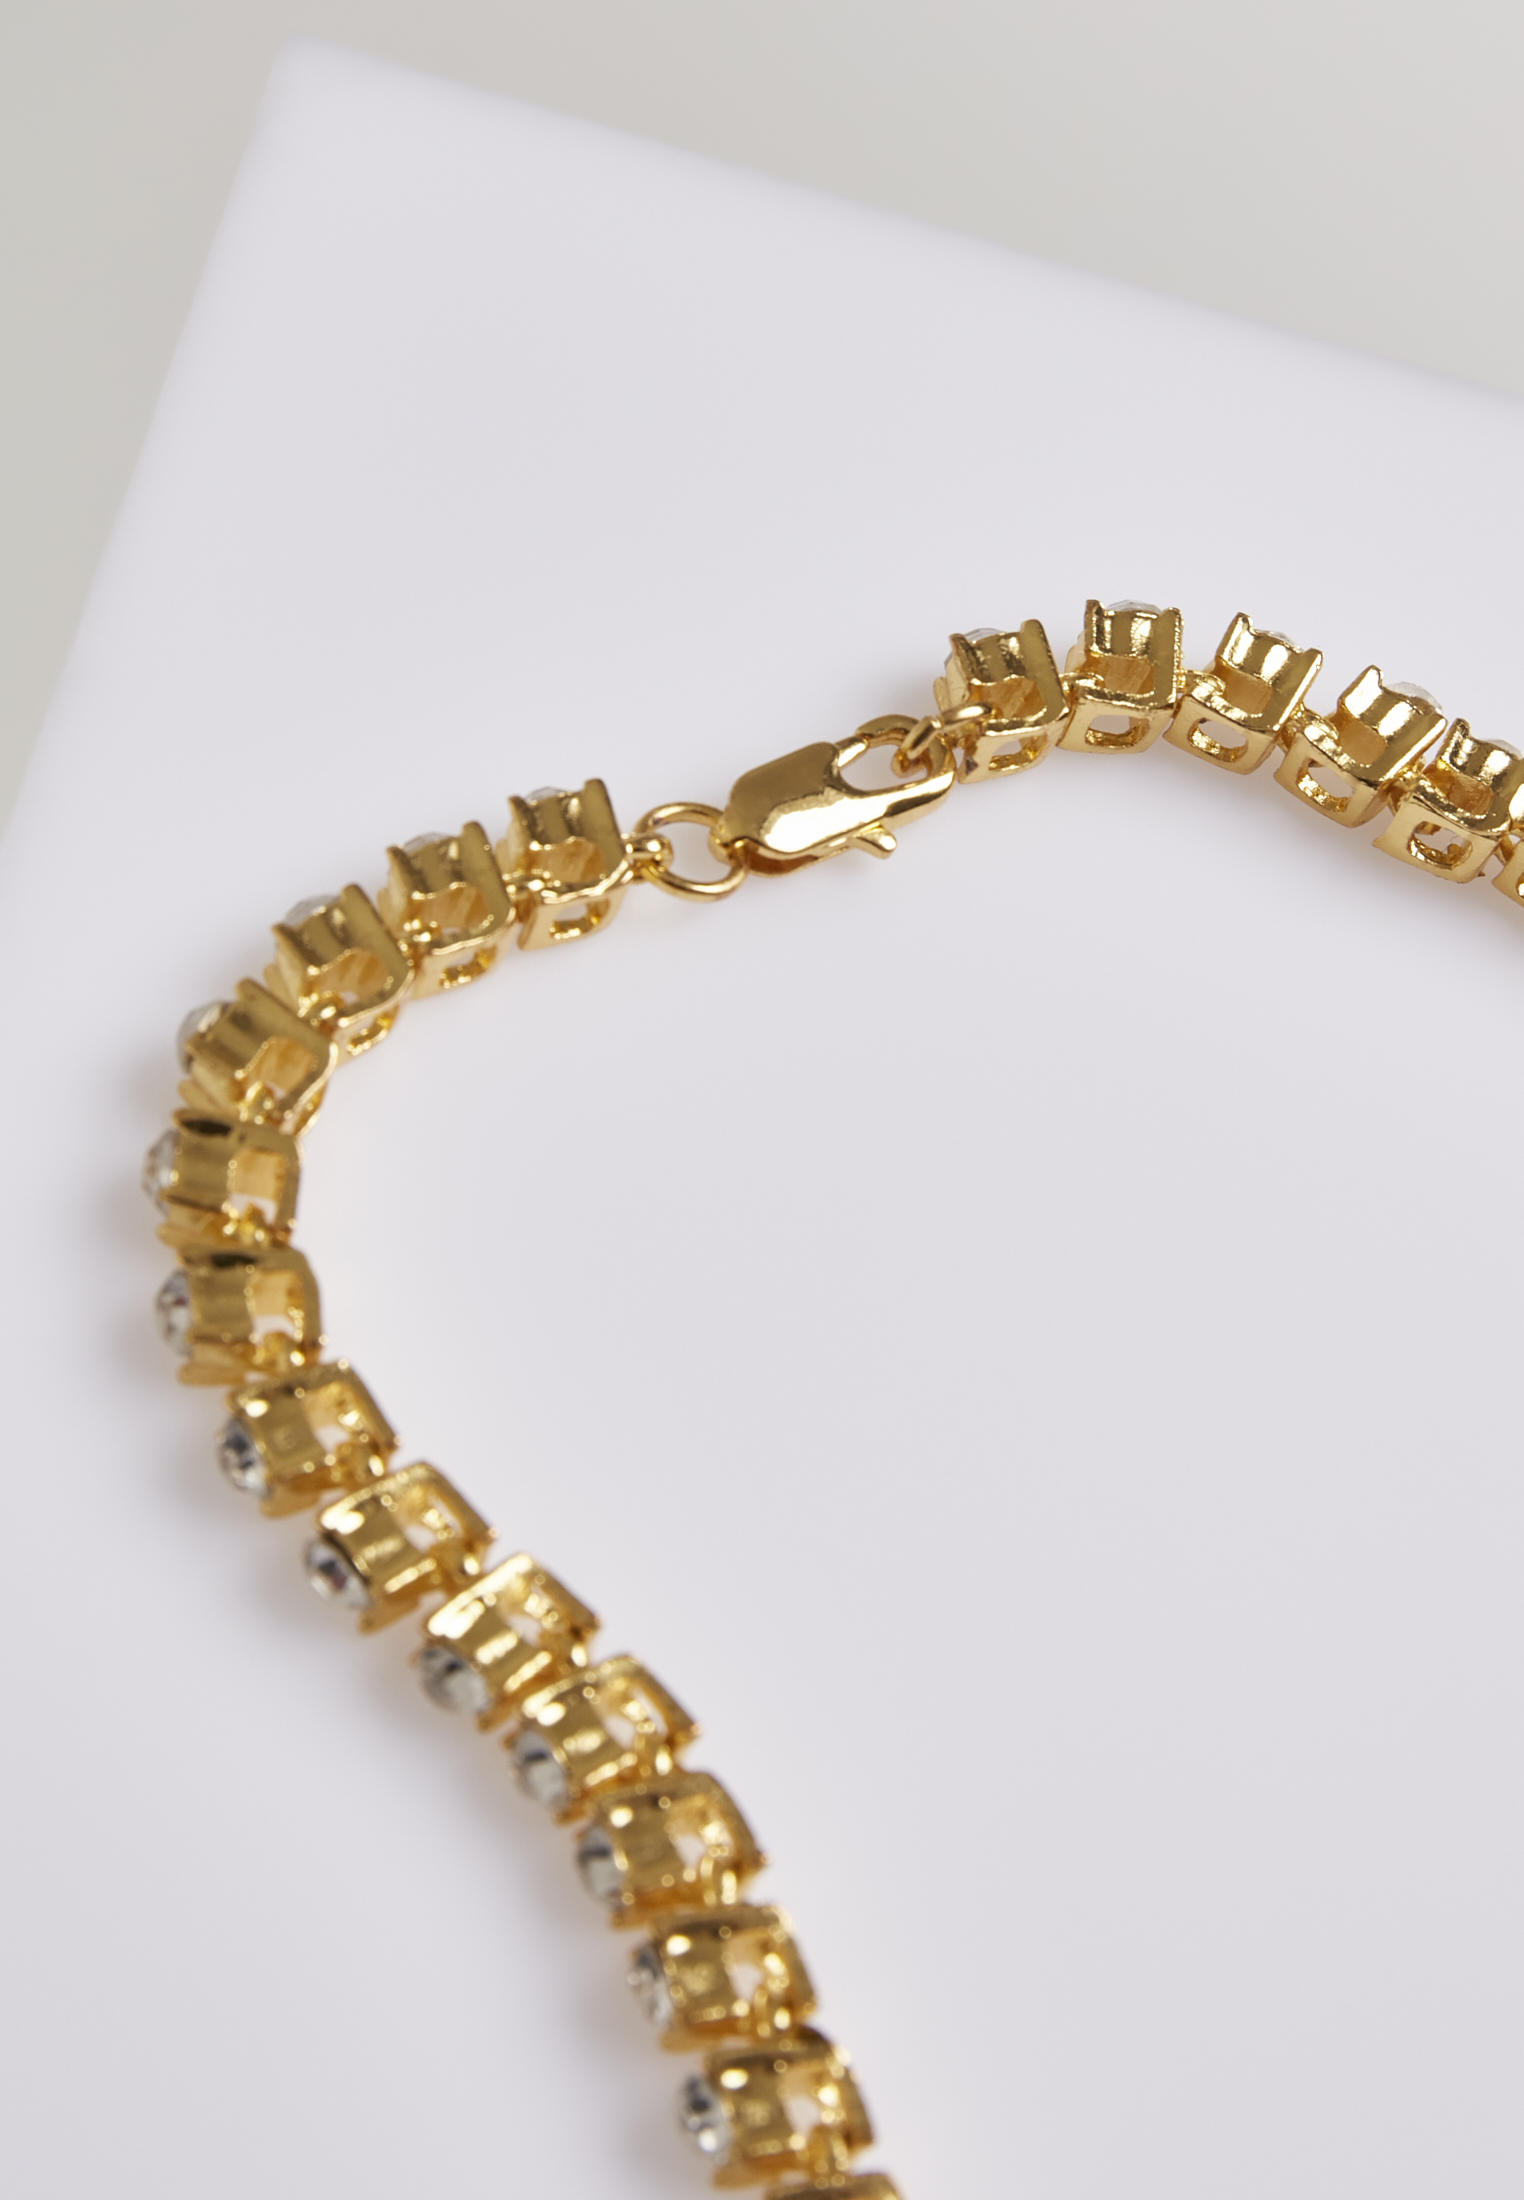 Schmuck Necklace With Stones in Farbe gold